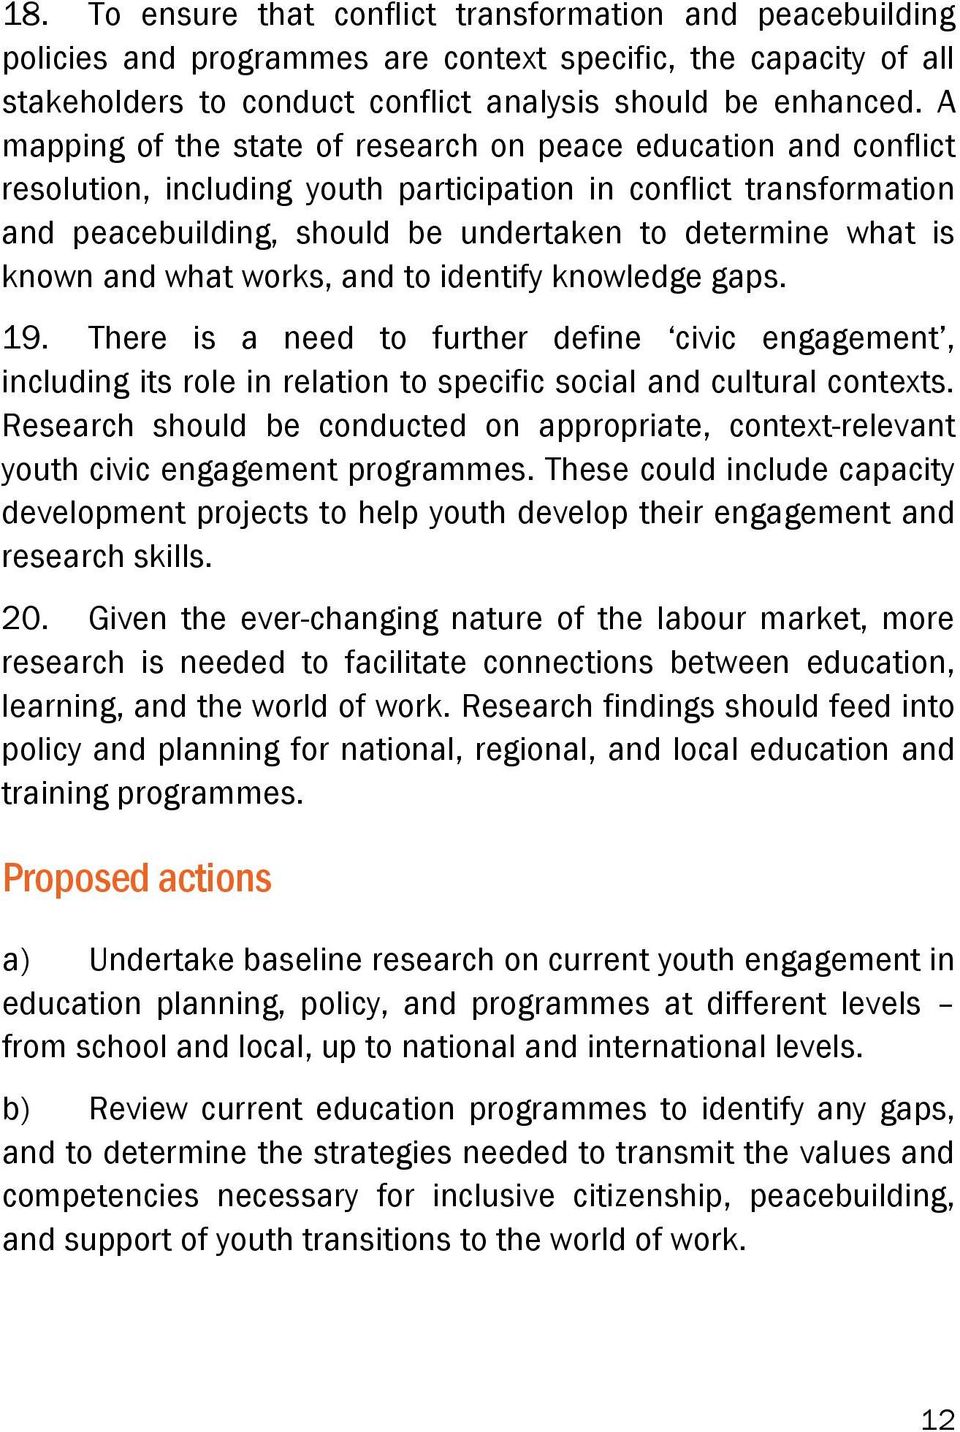 known and what works, and to identify knowledge gaps. 19. There is a need to further define civic engagement, including its role in relation to specific social and cultural contexts.